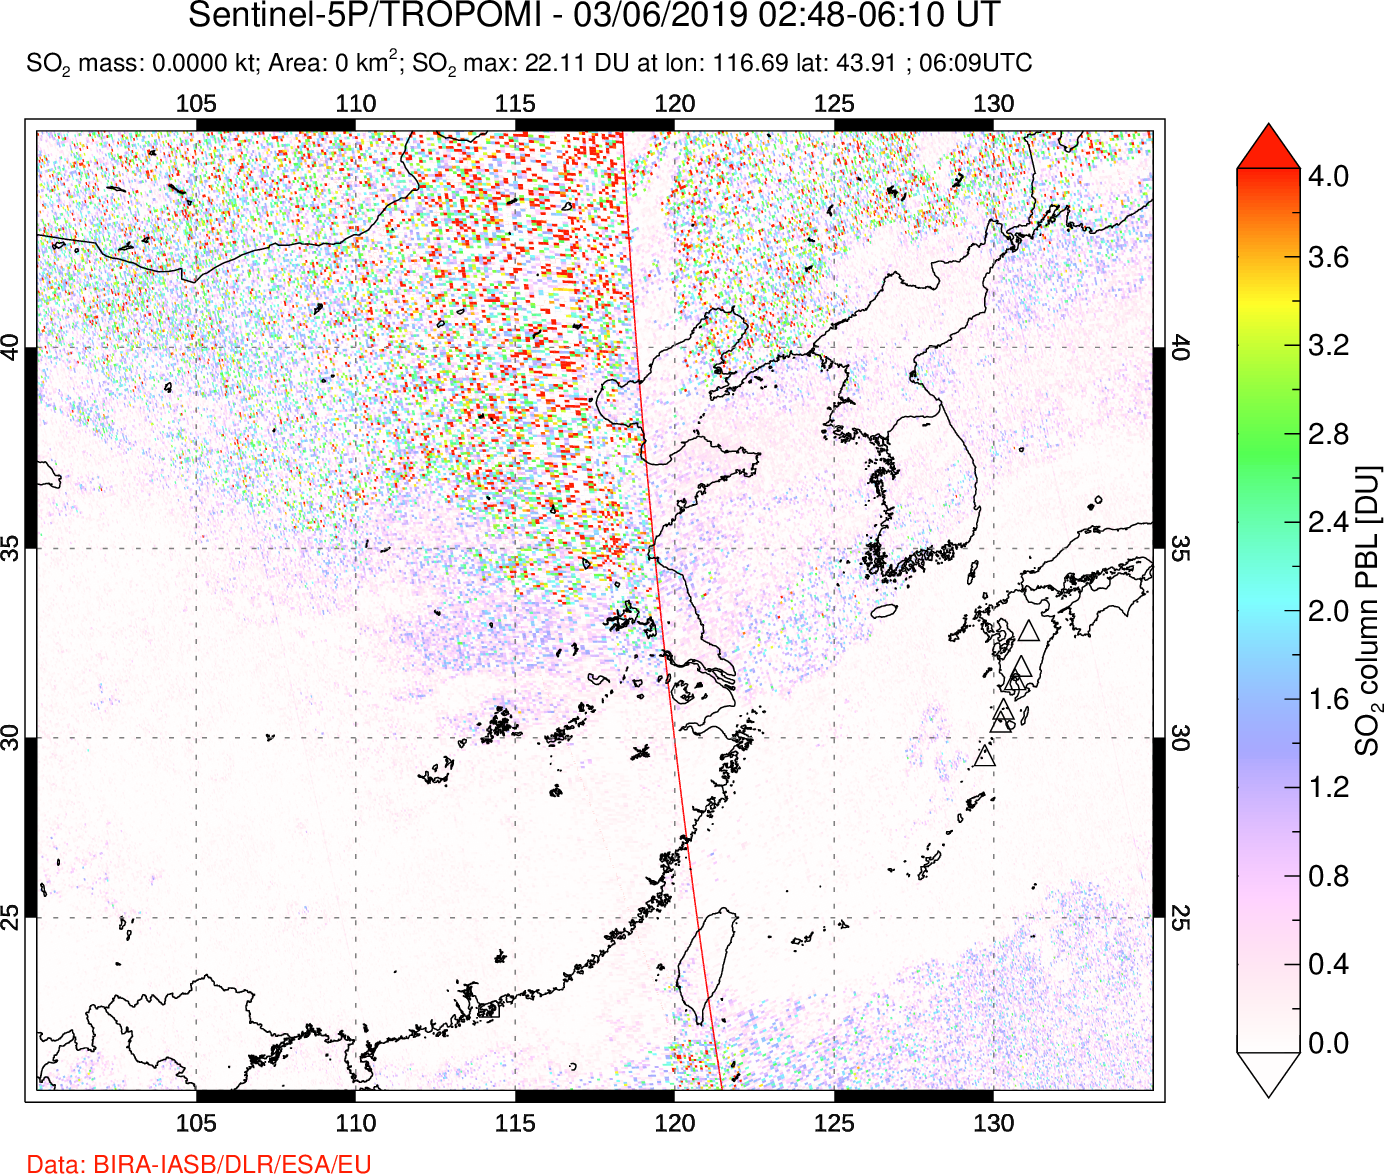 A sulfur dioxide image over Eastern China on Mar 06, 2019.